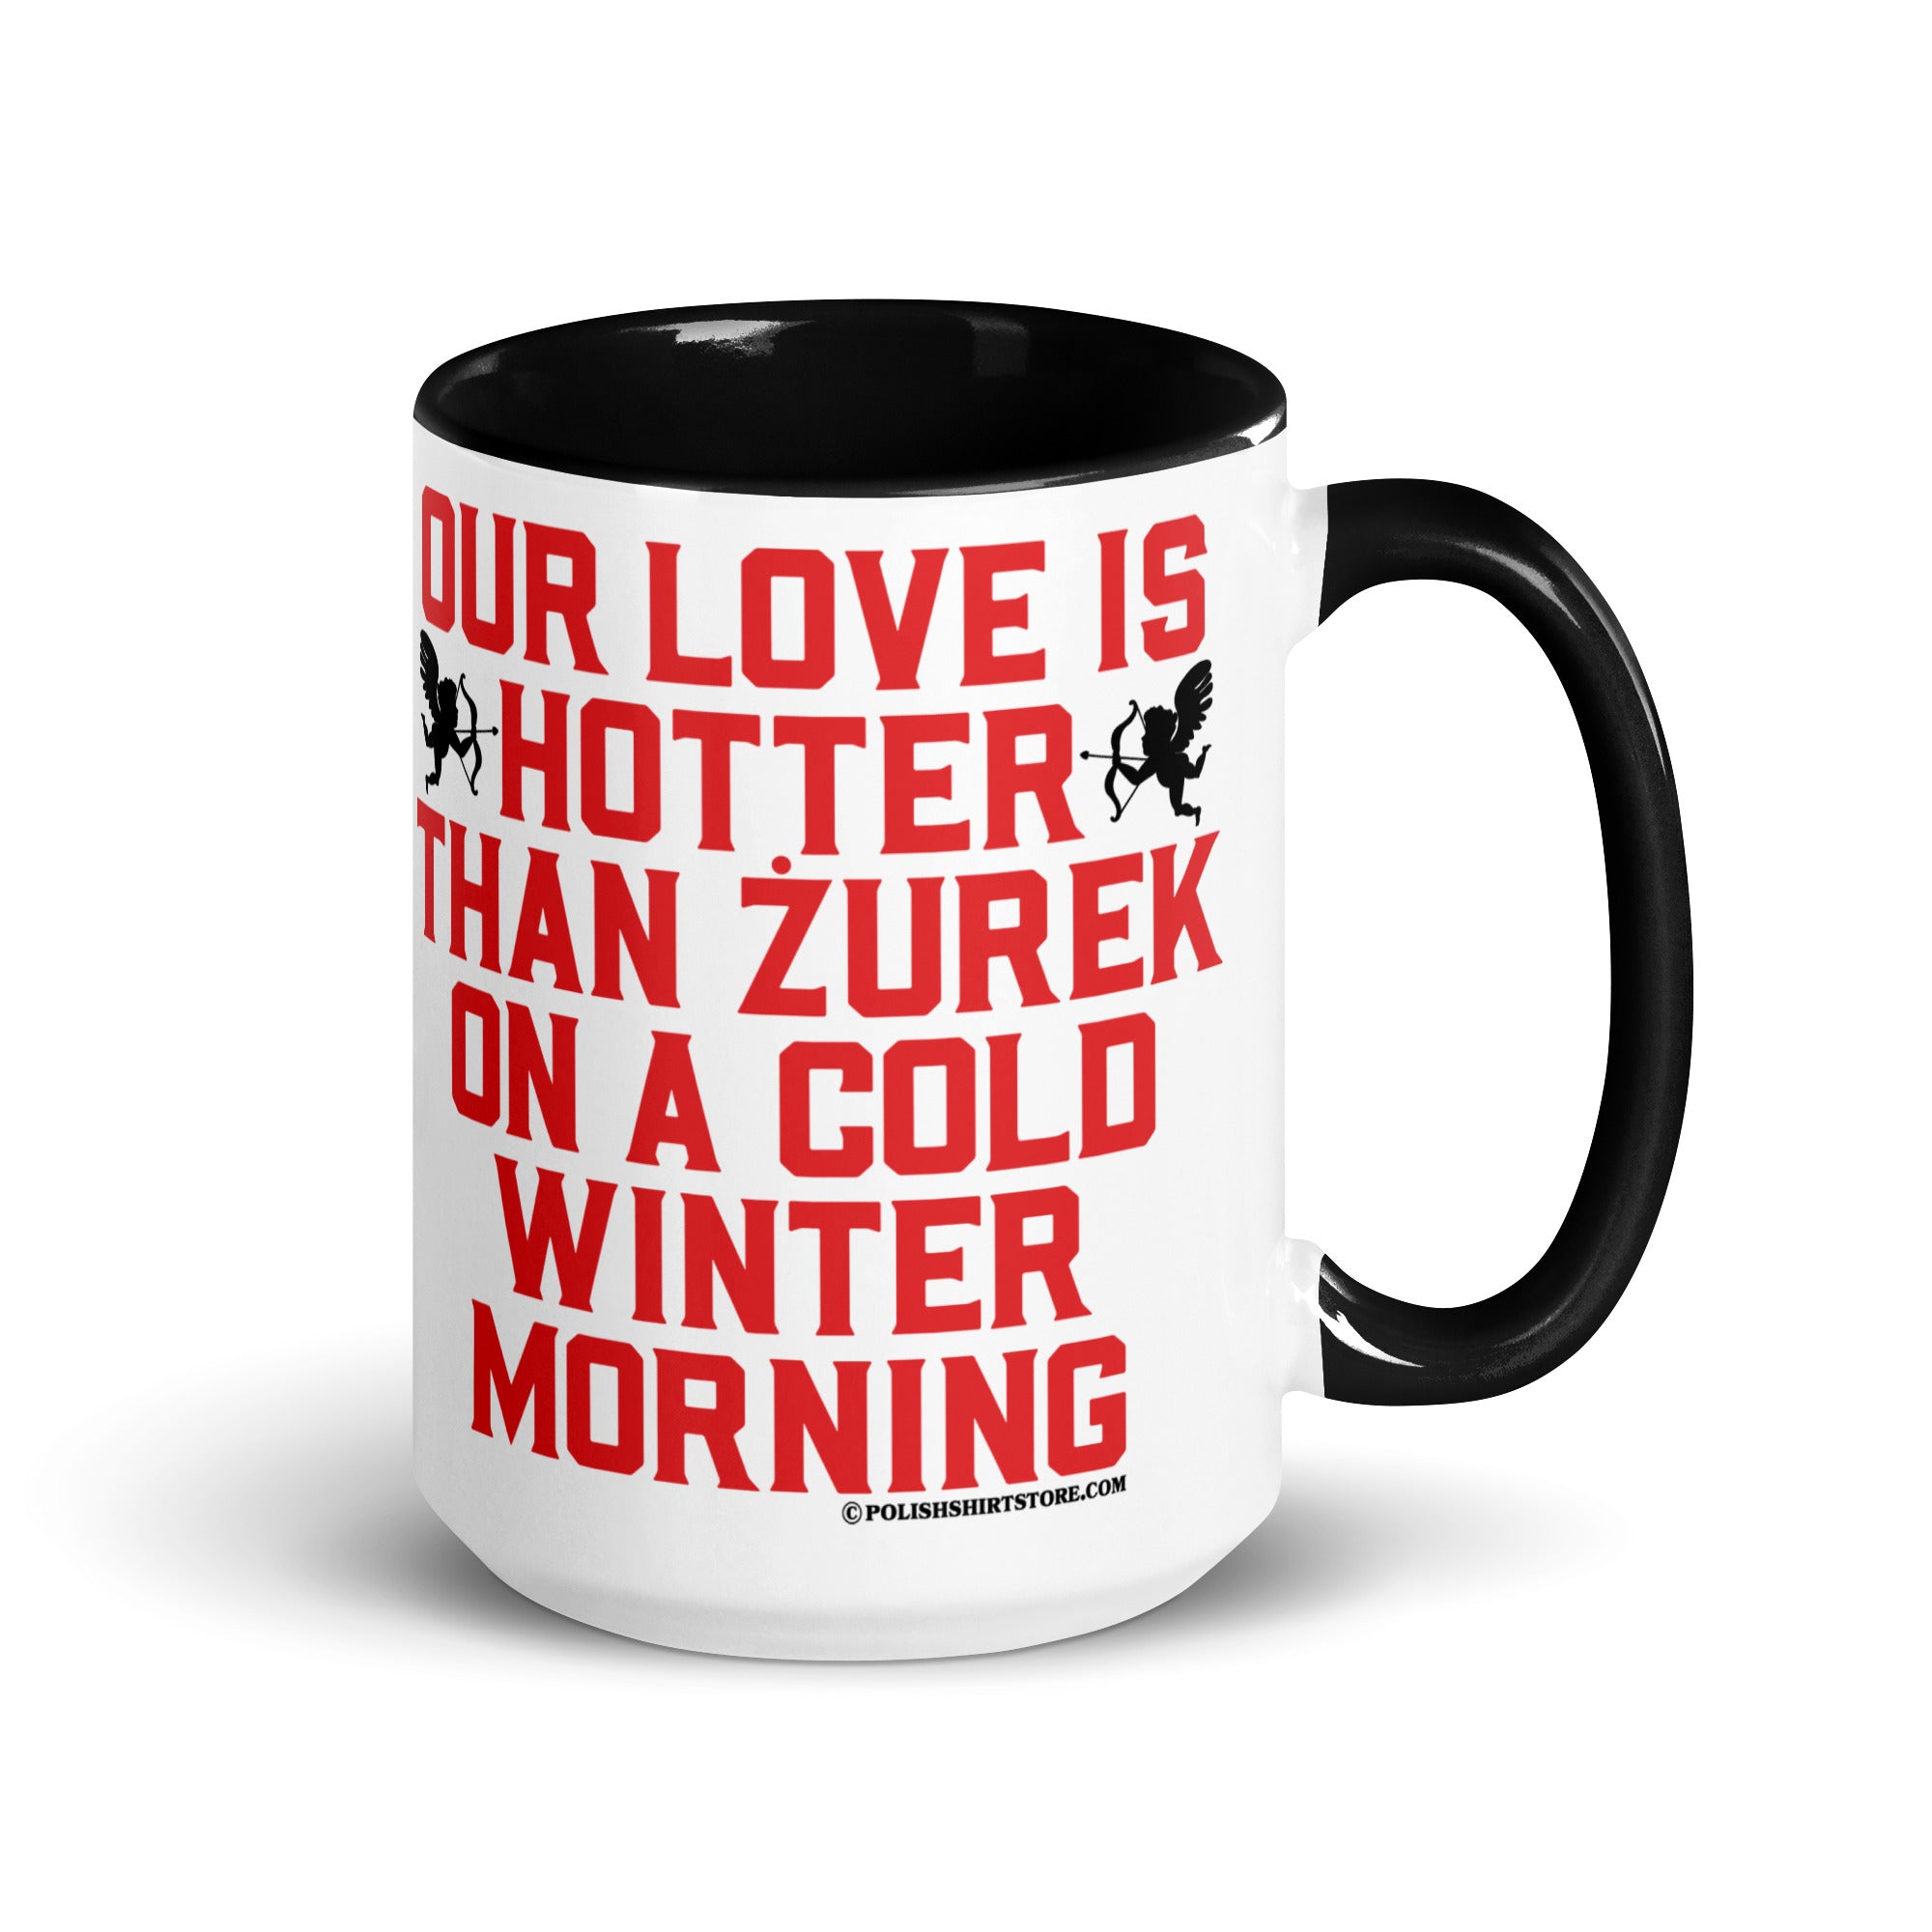 Our Love Is Hotter Than Zurek On A Cold Winter Morning Coffee Mug with Color Inside  Polish Shirt Store Black 15 oz 